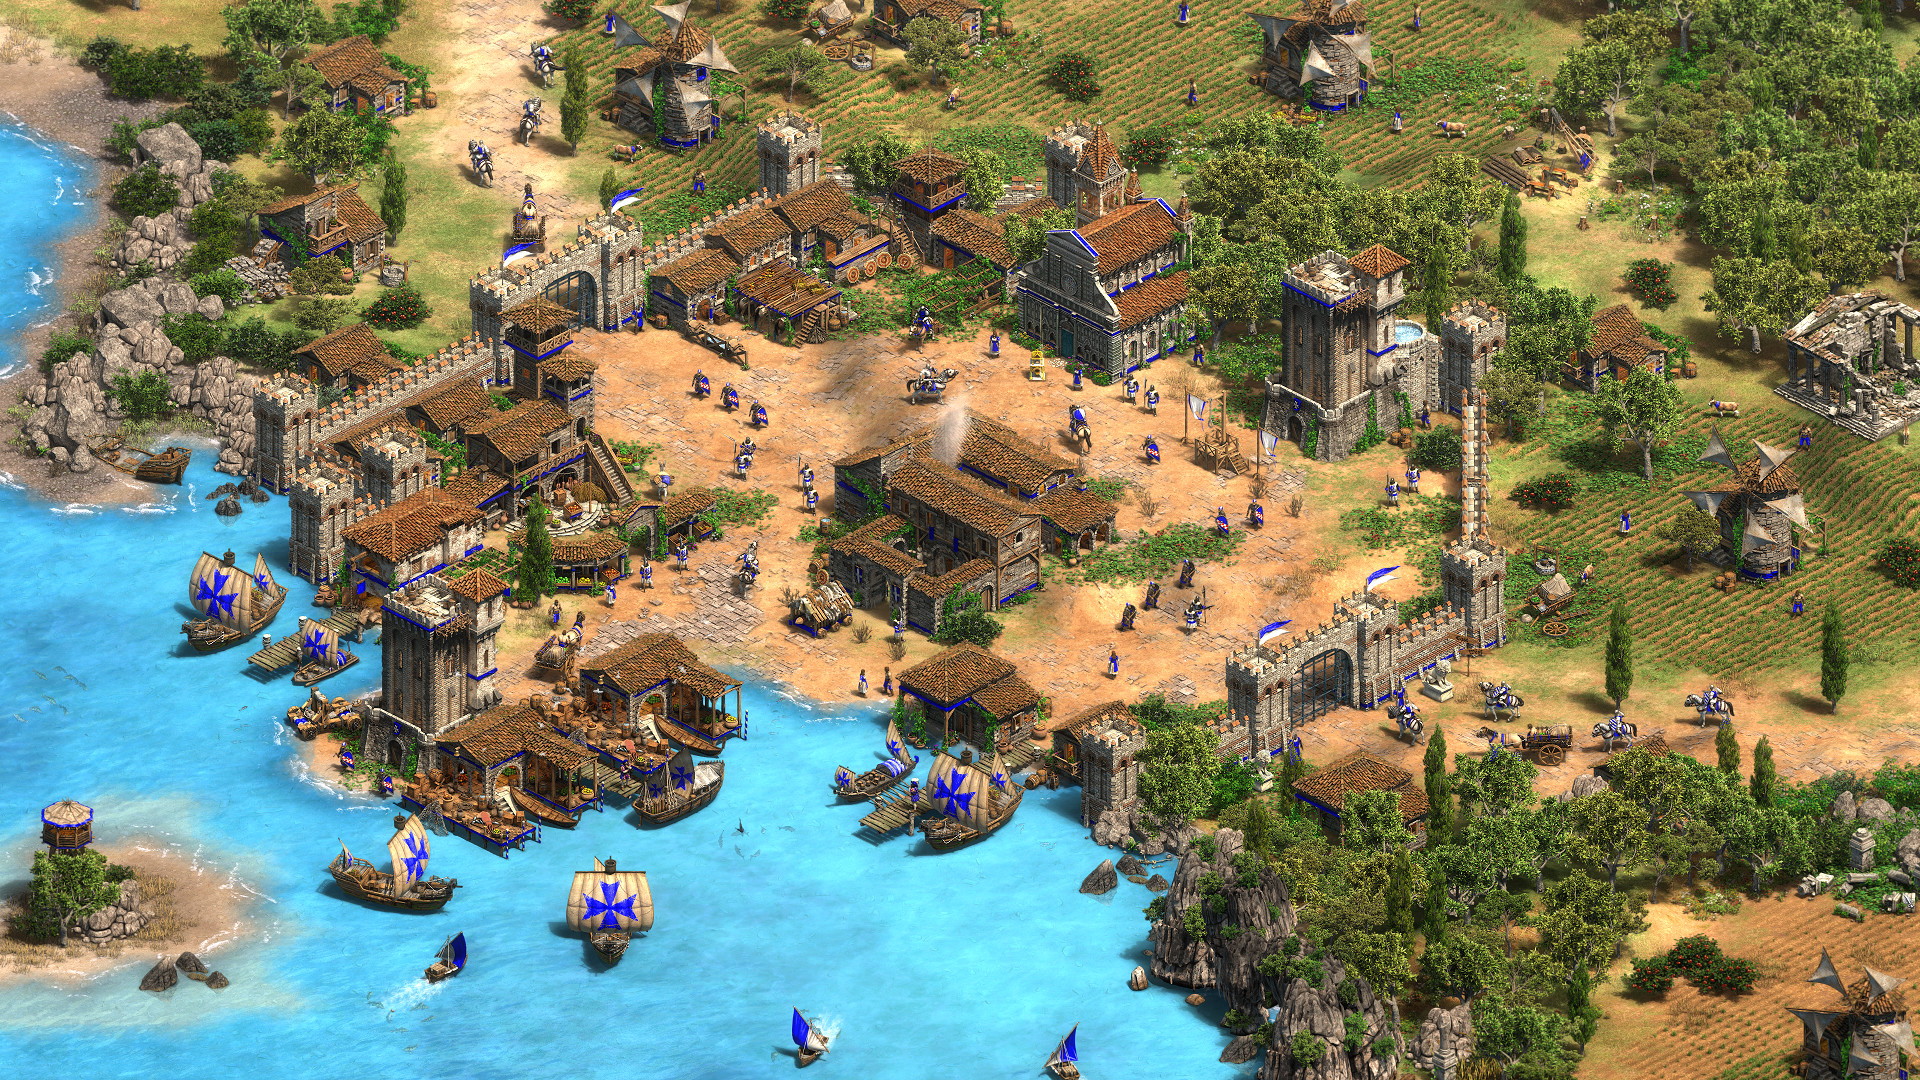 Age of Empires II: Definitive Edition - Lords of the West - screenshot 3